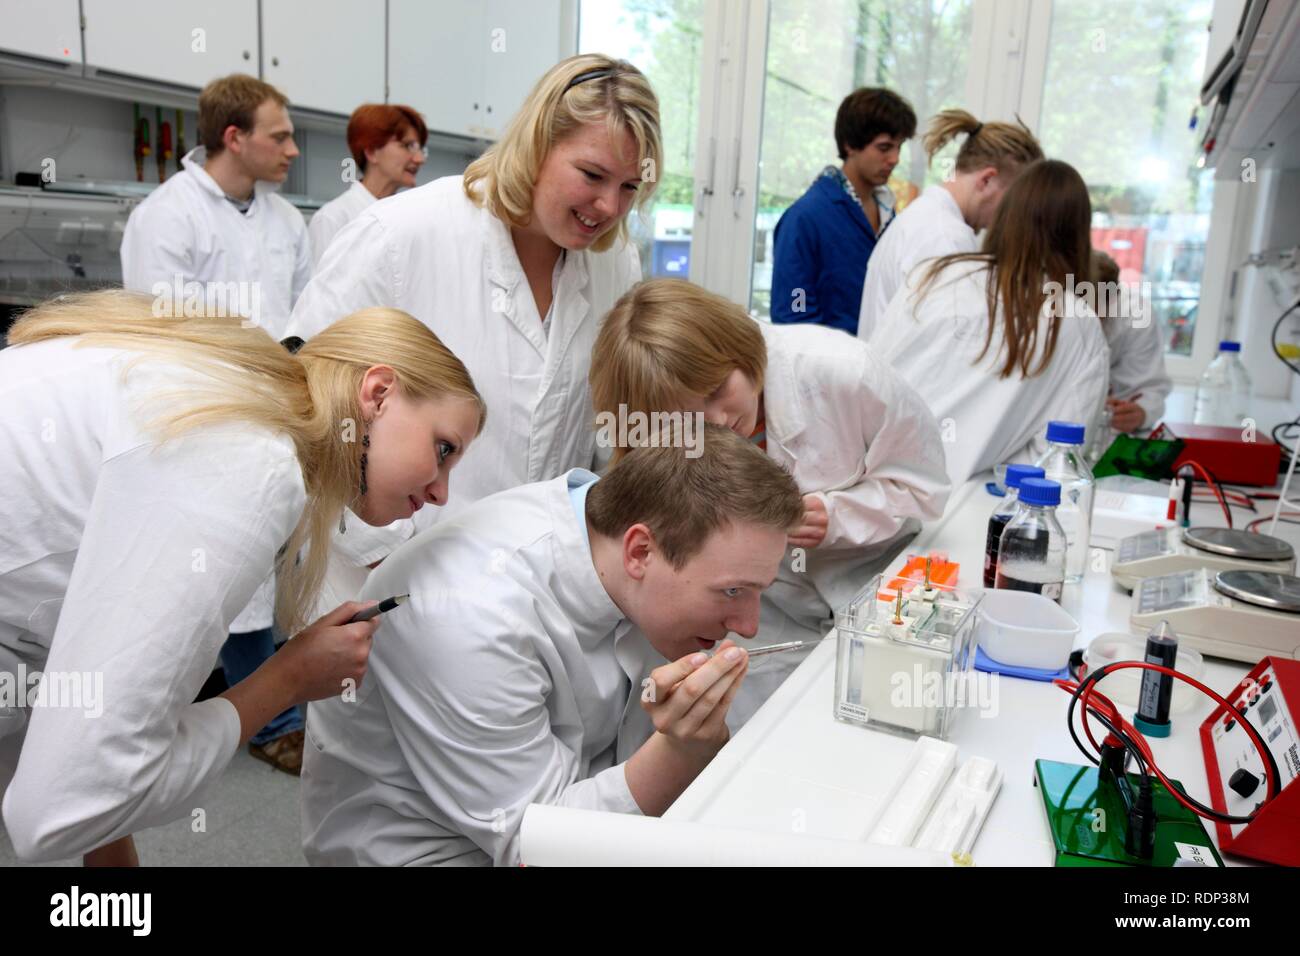 Medical students, internship group in a laboratory, the internship participants are assessing the loading of a gel in a vertical Stock Photo